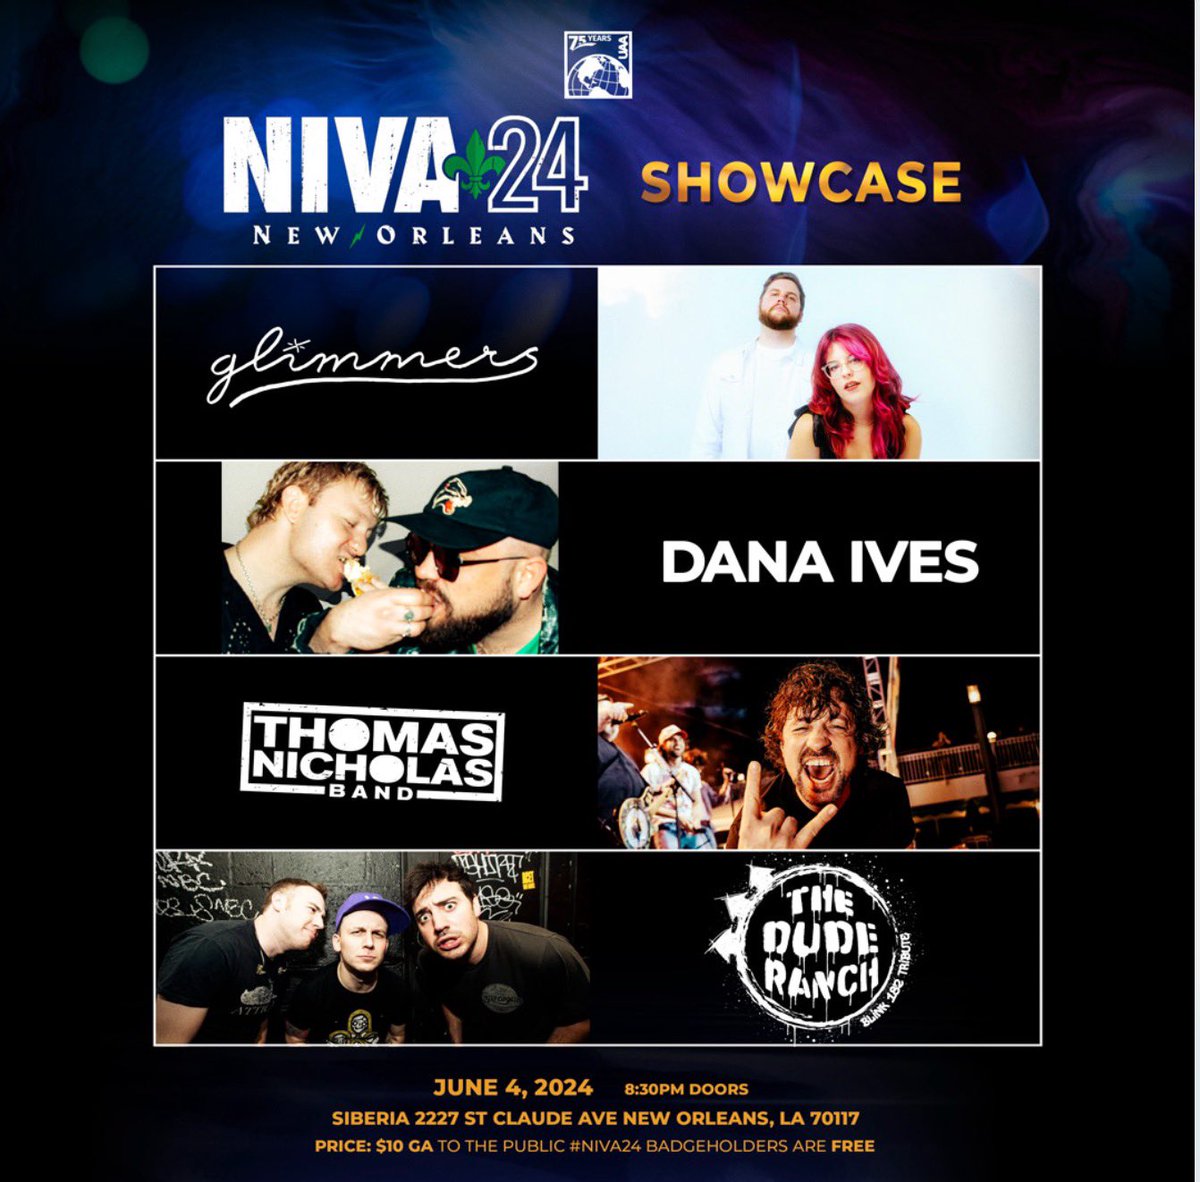 NOLA! We’ll be back playing an official @nivassoc showcase at Siberia on June 4th 💜💚 Buy tickets now and get ready for a couple more show announces soon!